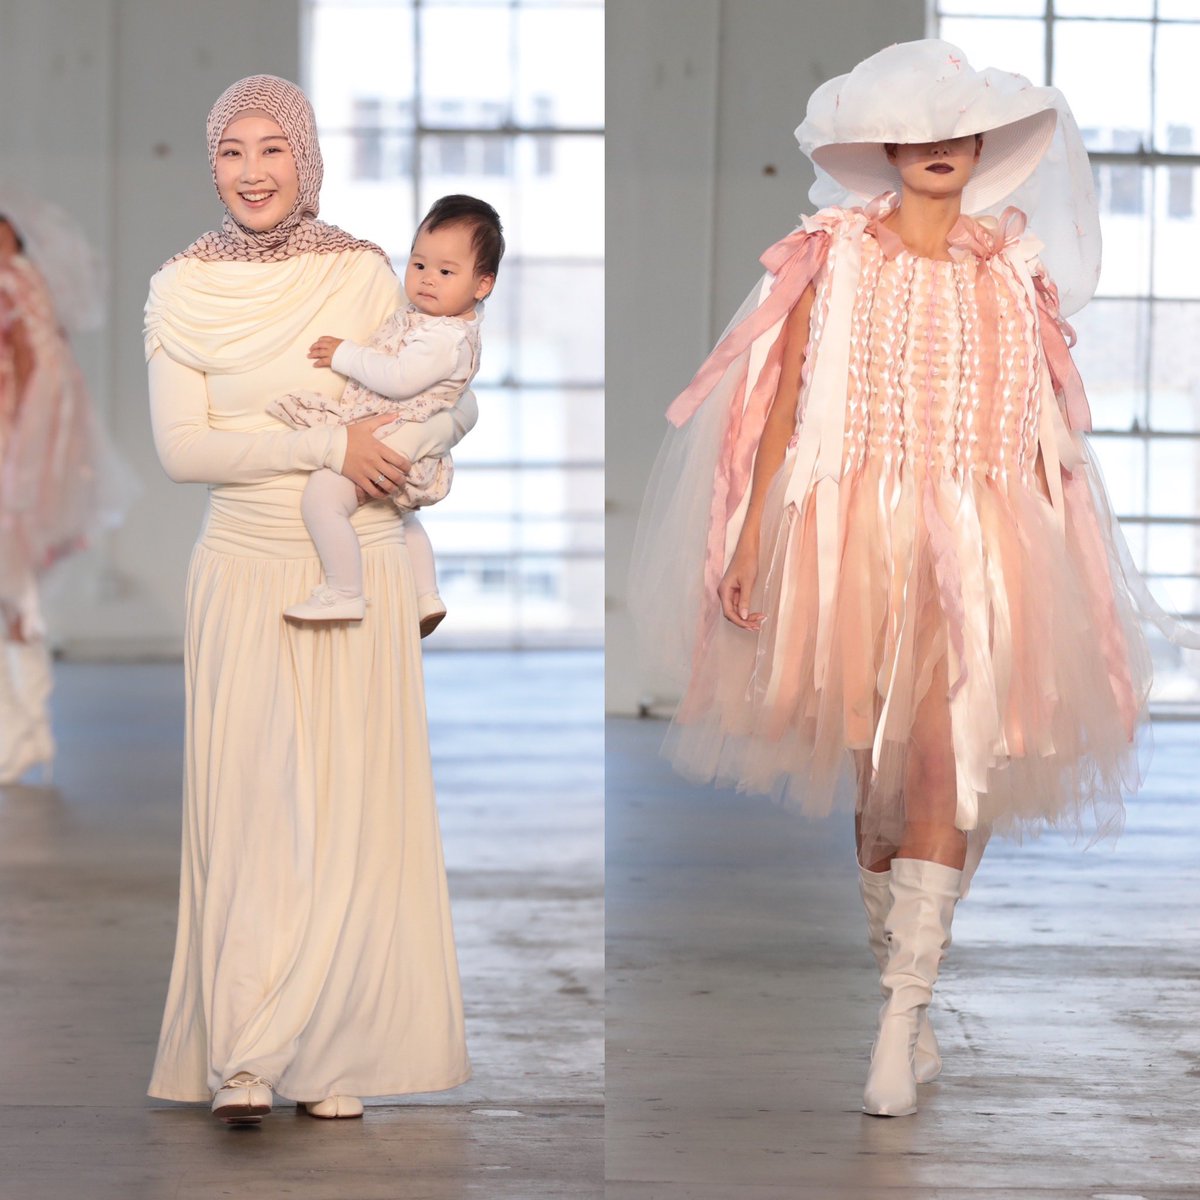 FIDM DEBUT 2024 Collections 📸 In PHOTOS ➡️ Designer & @FIDM Advanced Fashion Design Program graduate Zijin Ma “Rabia” Collection - inspired by “The paradise at the feet of motherhood” 📸: @_abimages @alexberliner #fidmdebut